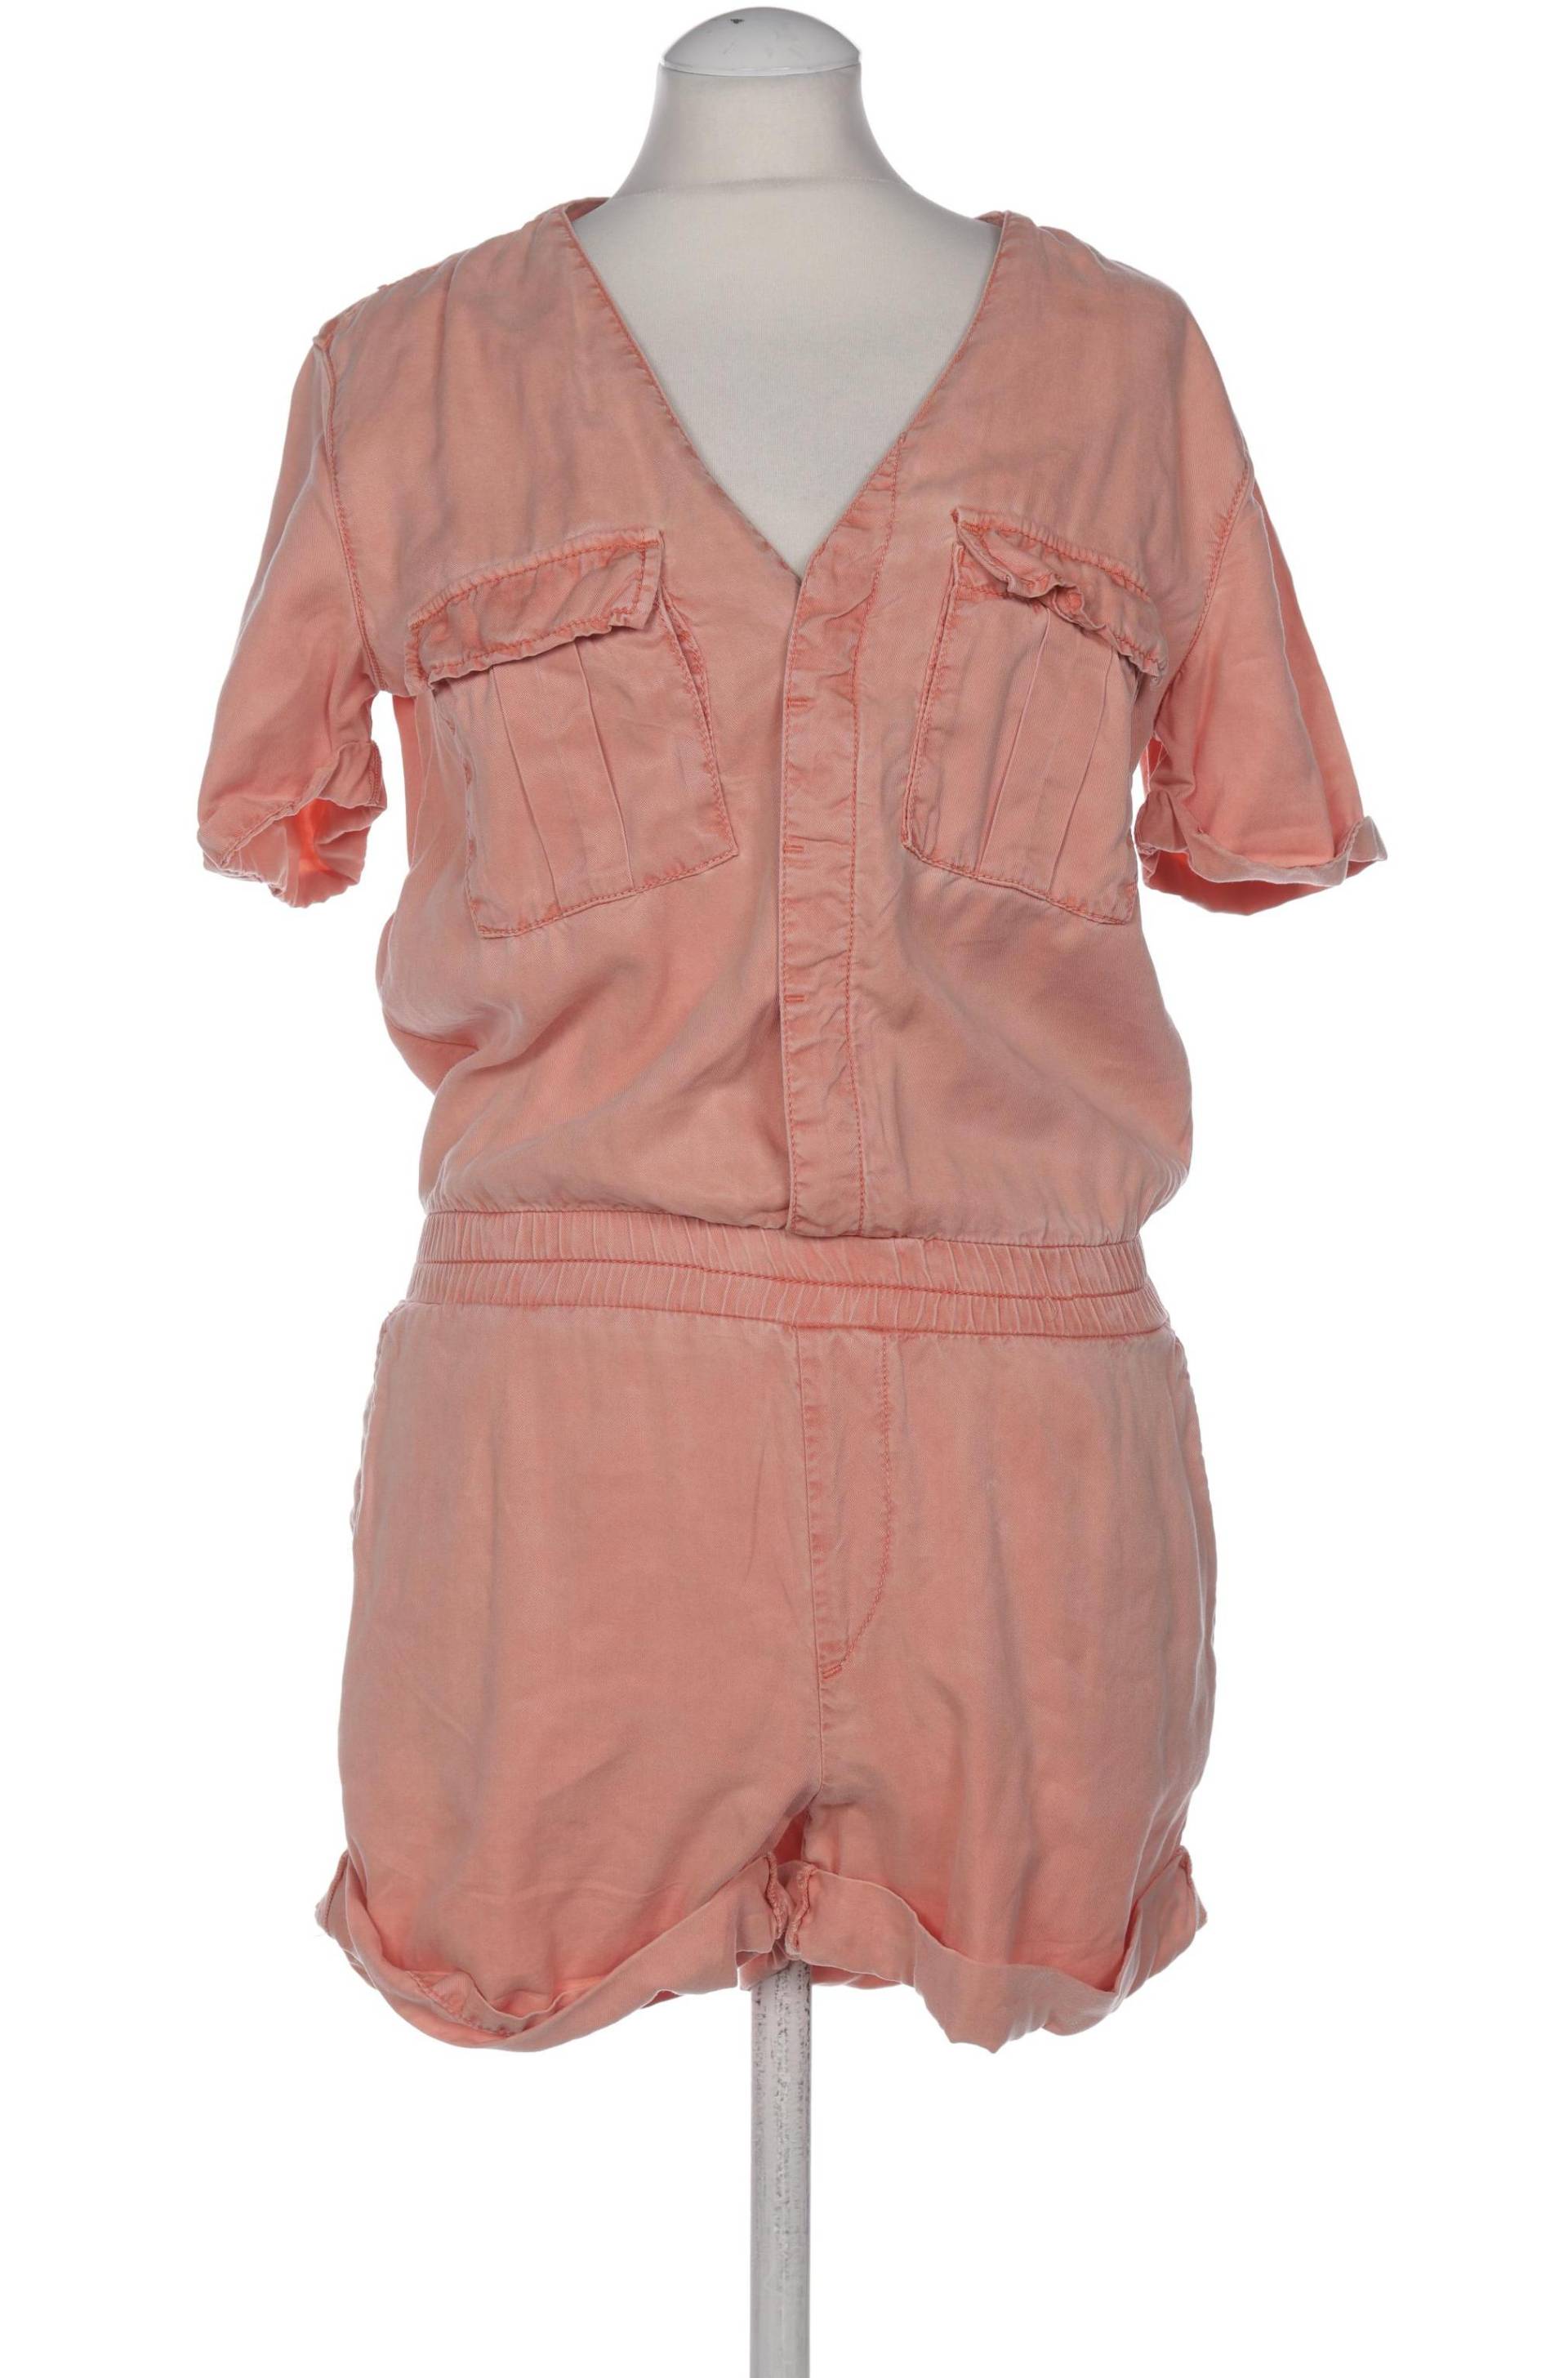 Pepe Jeans Damen Jumpsuit/Overall, pink, Gr. 36 von Pepe Jeans